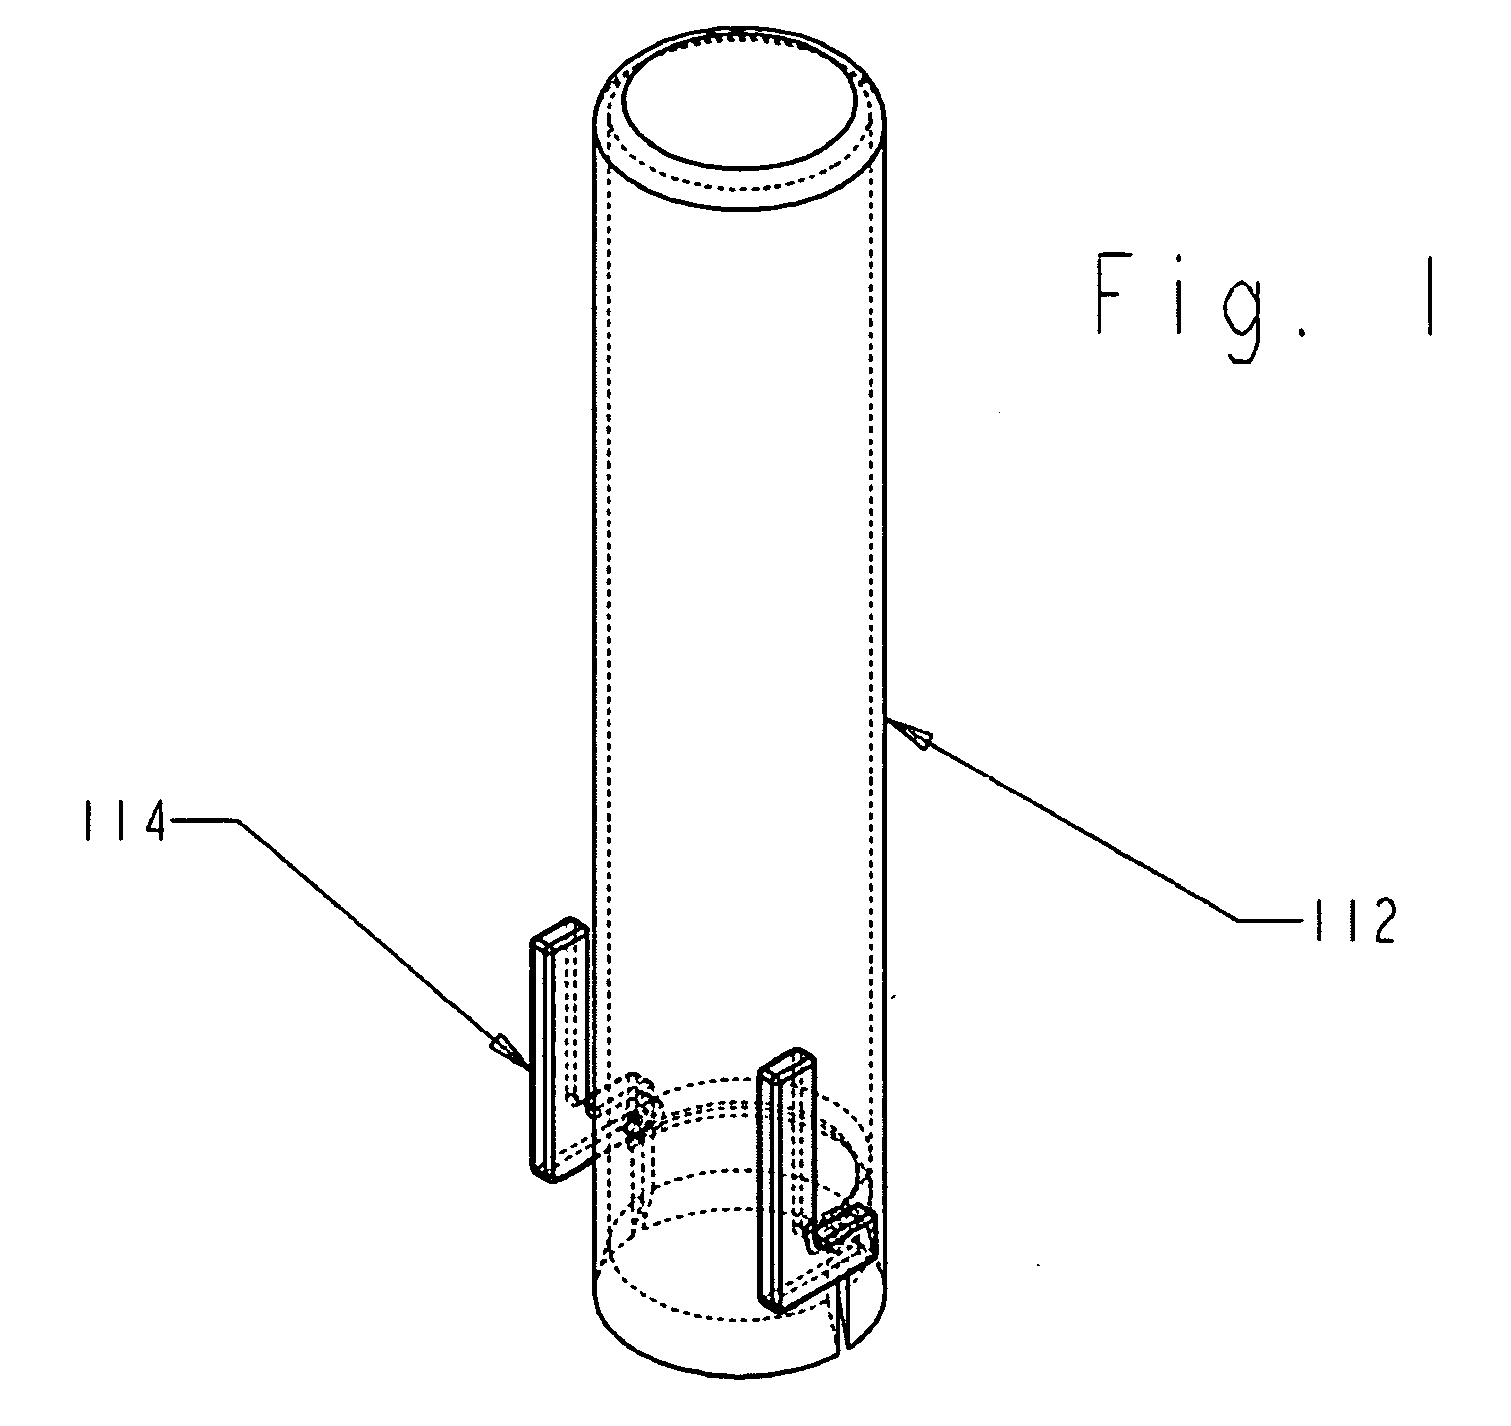 Apparatus for punch biopsy